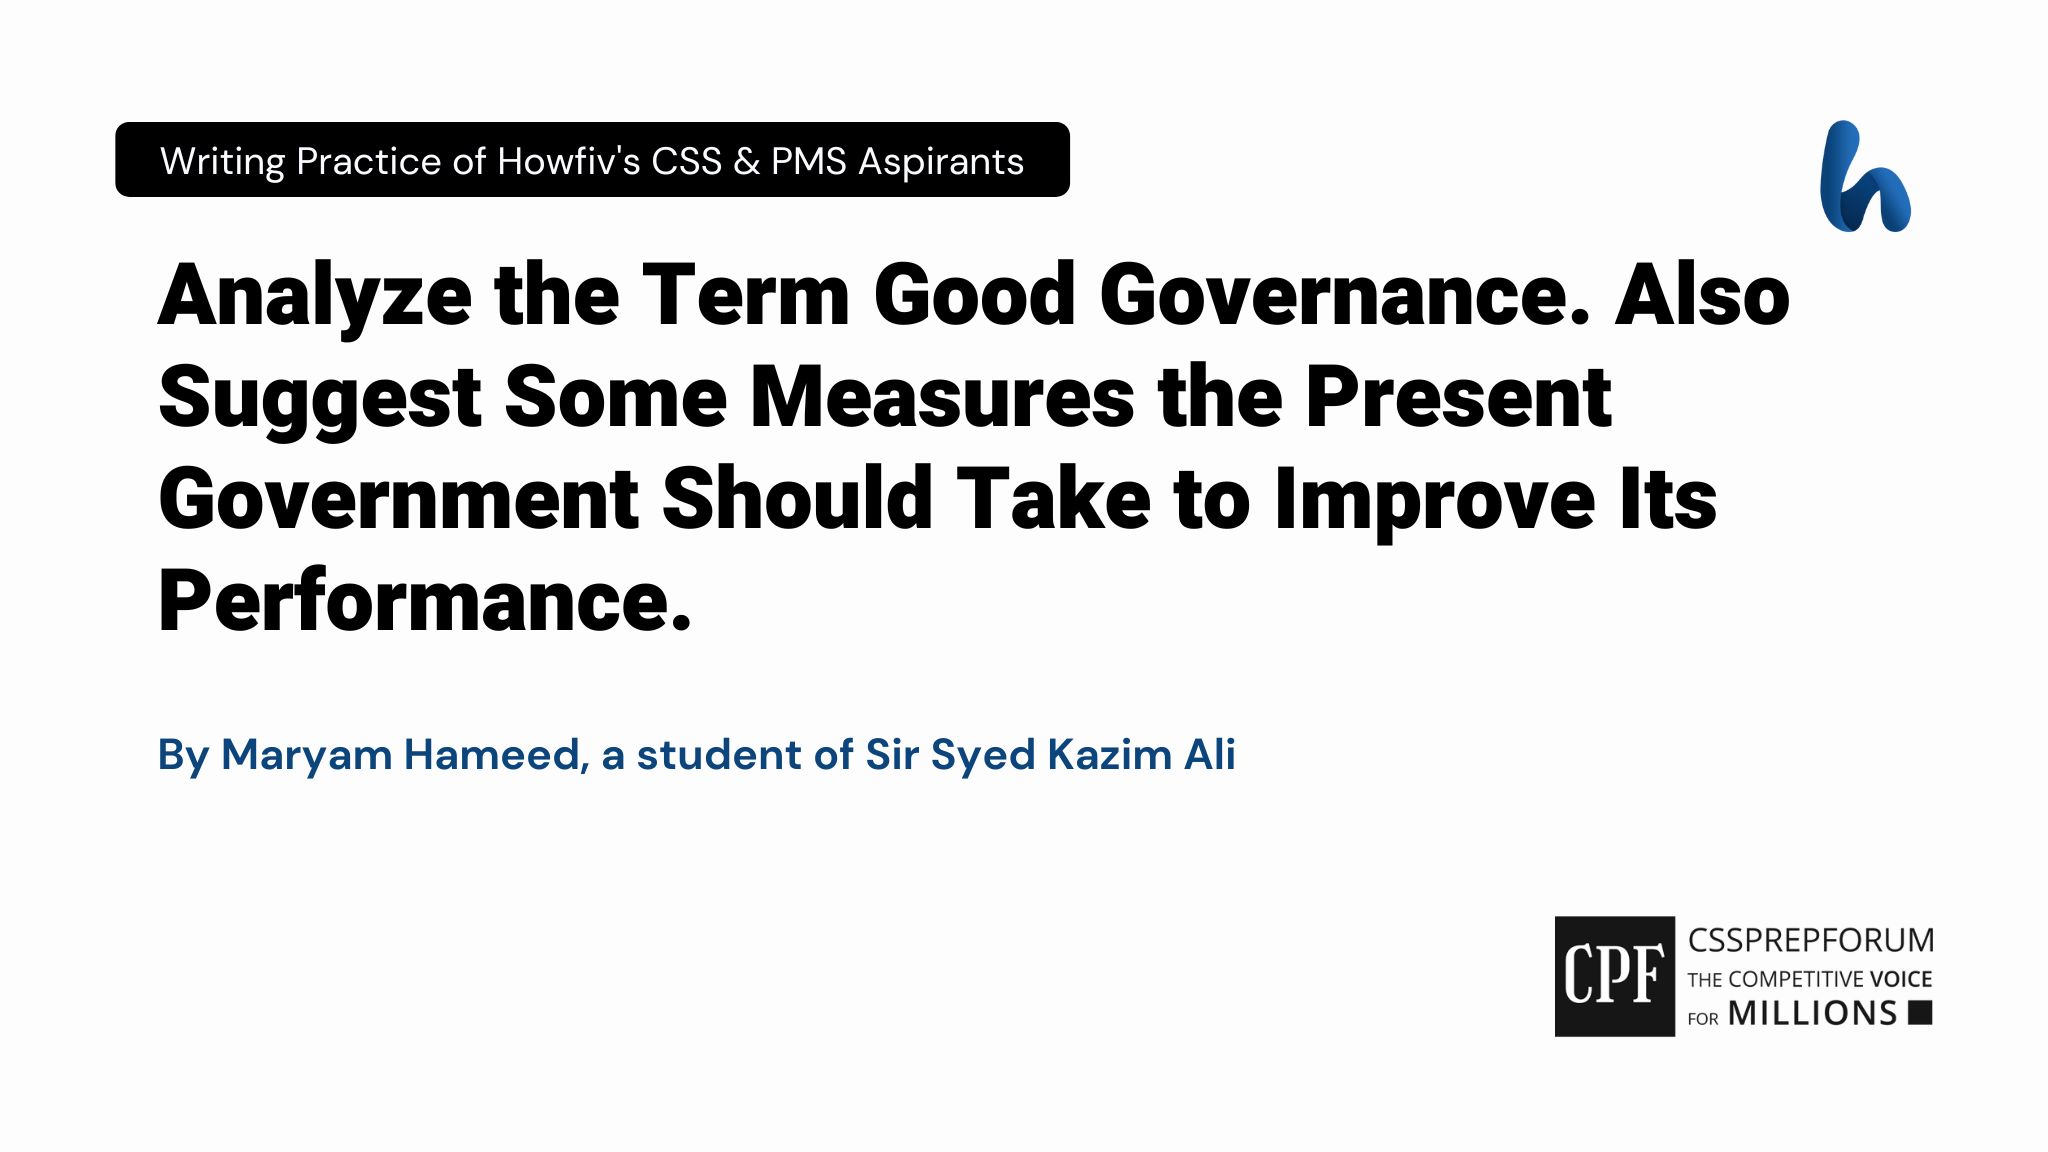 Analyze the Term Good Governance. Also Suggest Some Measures the Present Government Should Take to Improve Its Performance. by Maryam Hameed